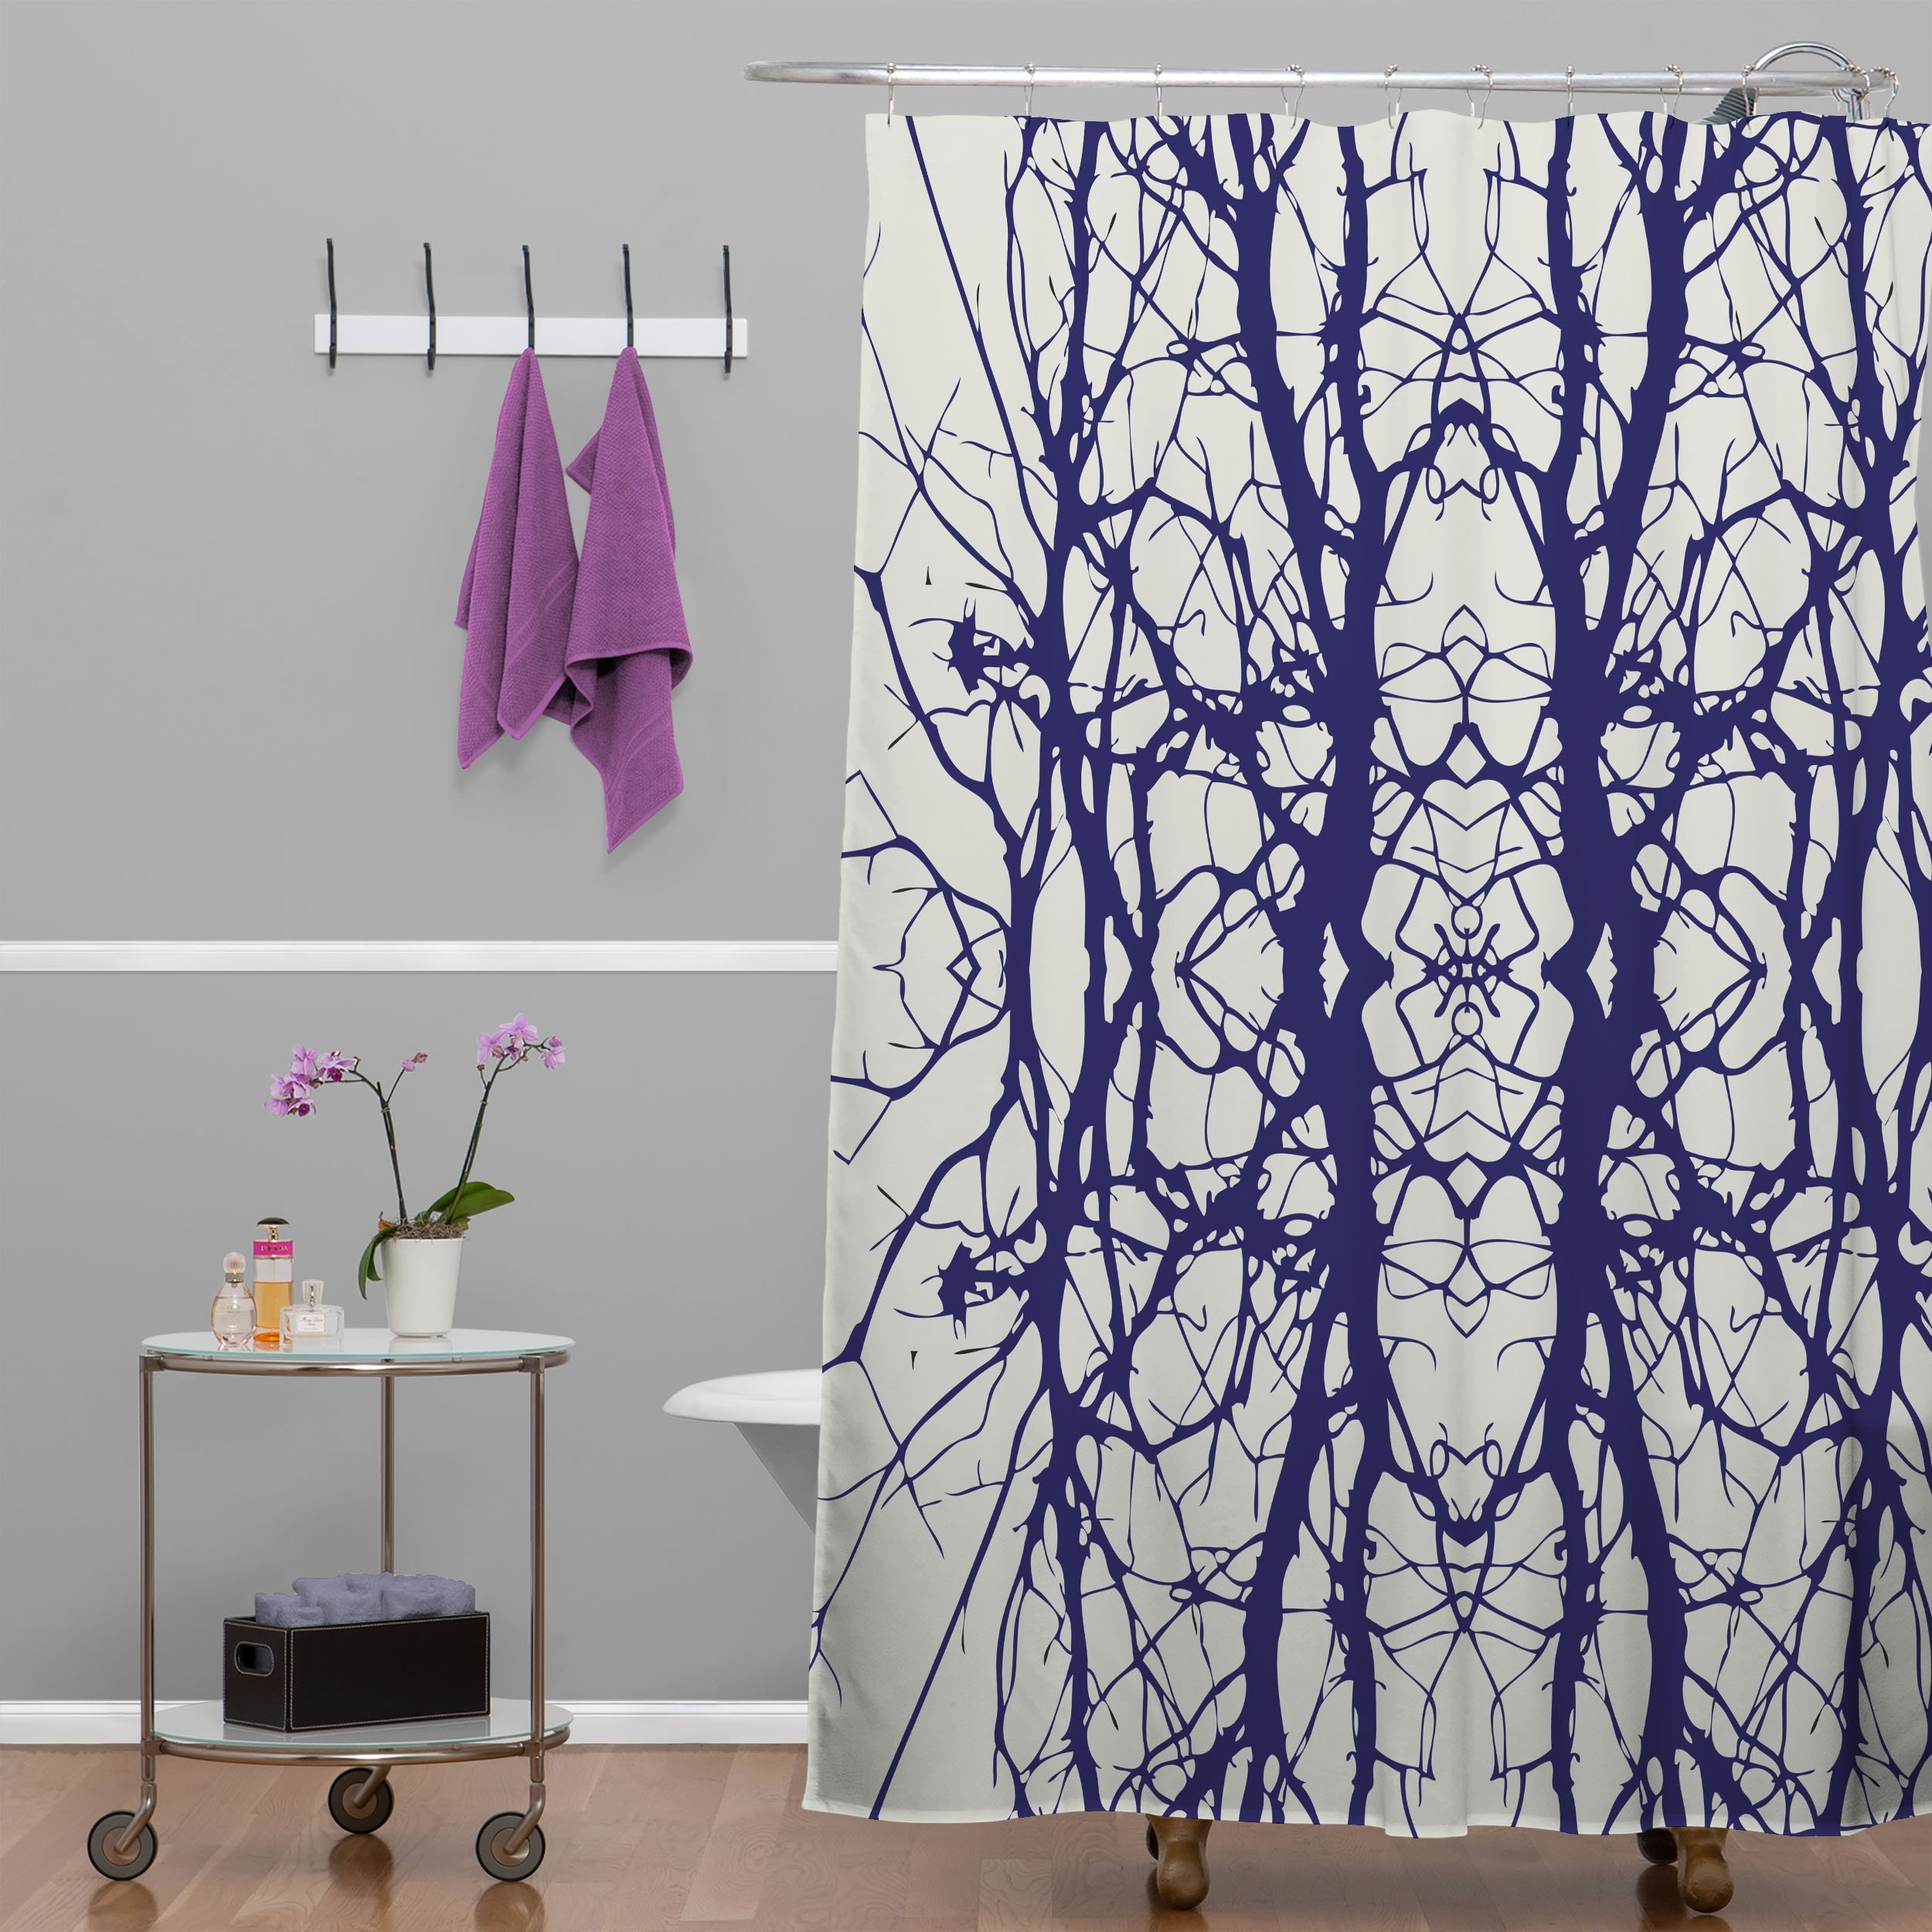 Holli Zollinger Tree Silhouette Shower Curtain - Standard 71"x74" with Liner - Image 1